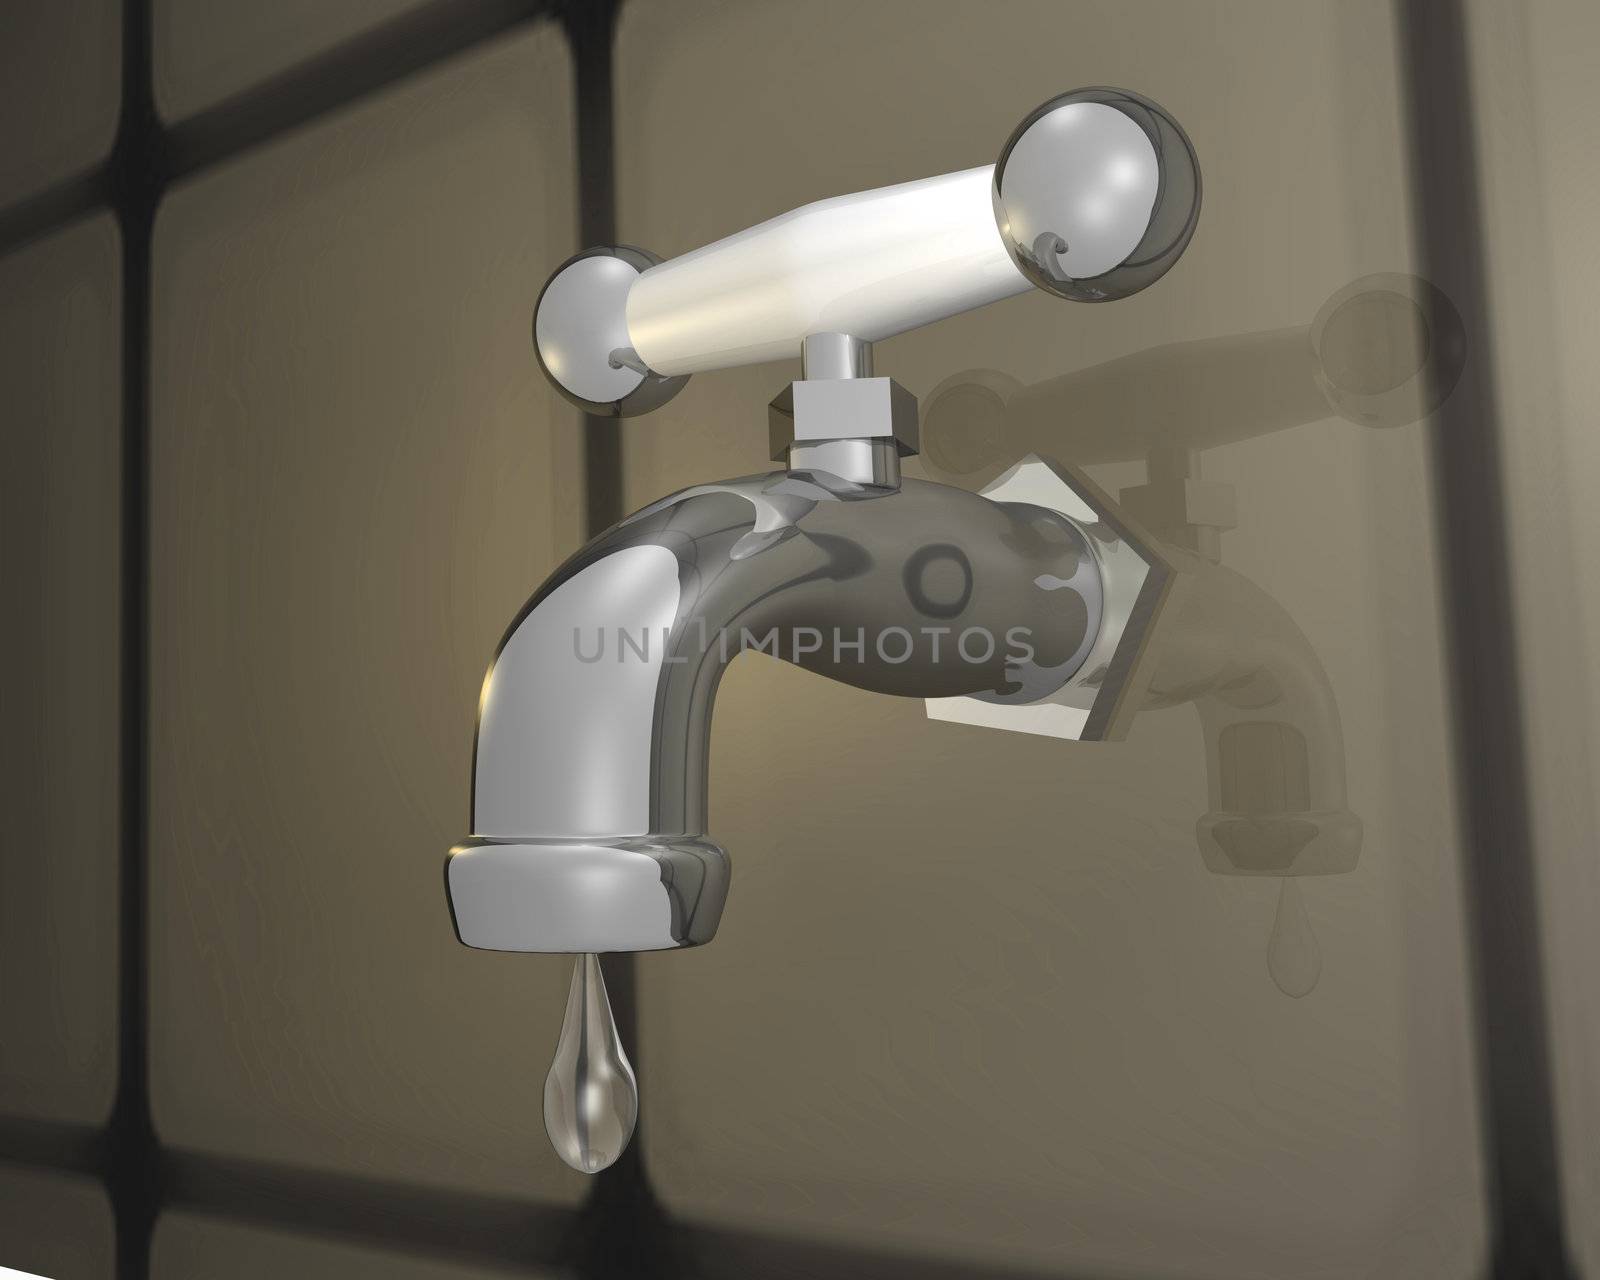 3D chrome faucet with drop of water.